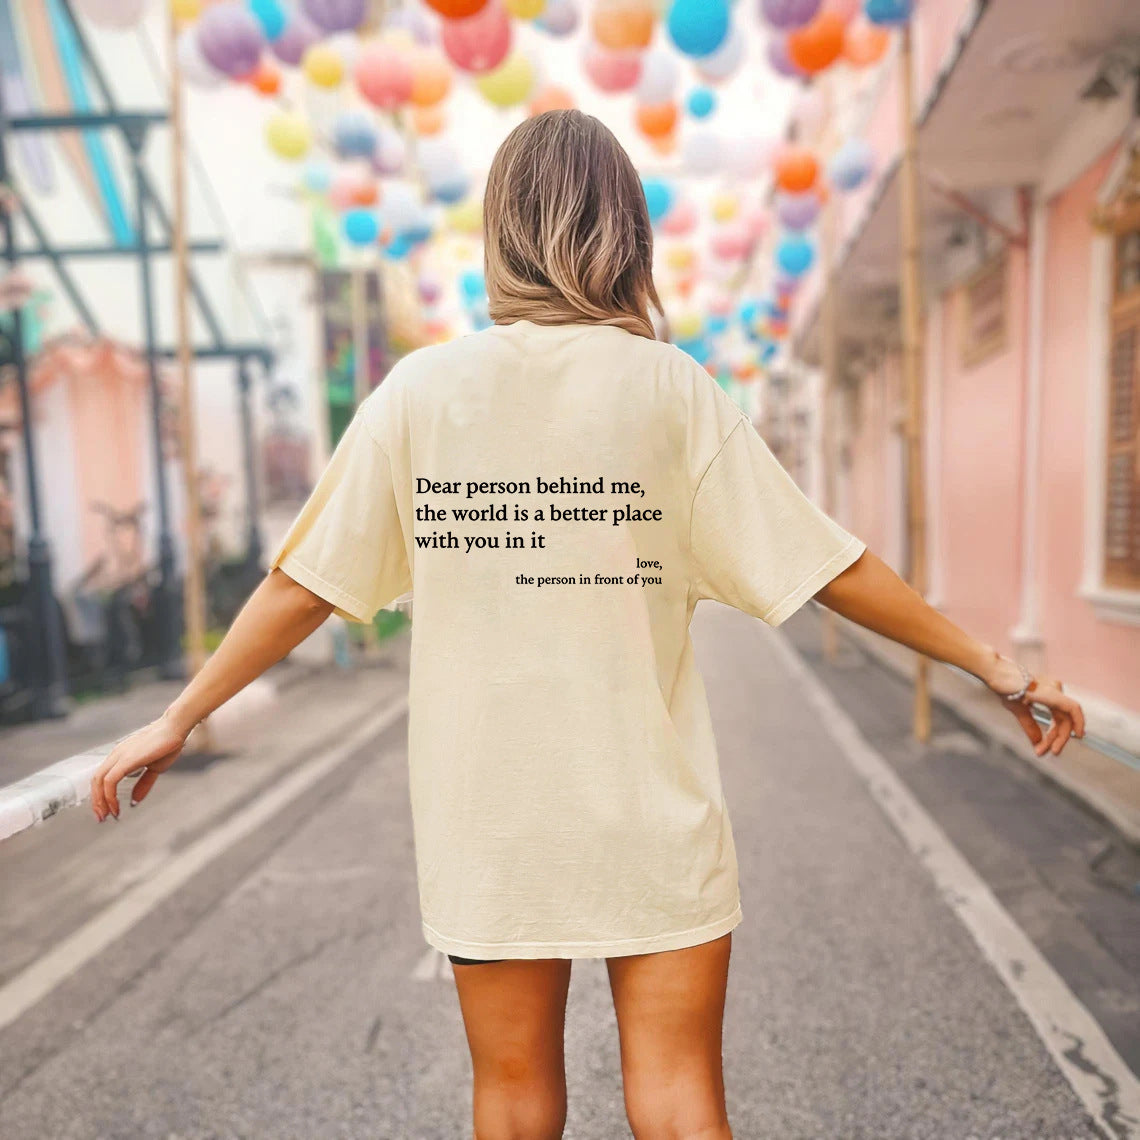 2023 New Fashion Womens Letter T-Shirt Round Neck Short Sleeve Slogan Tee Top